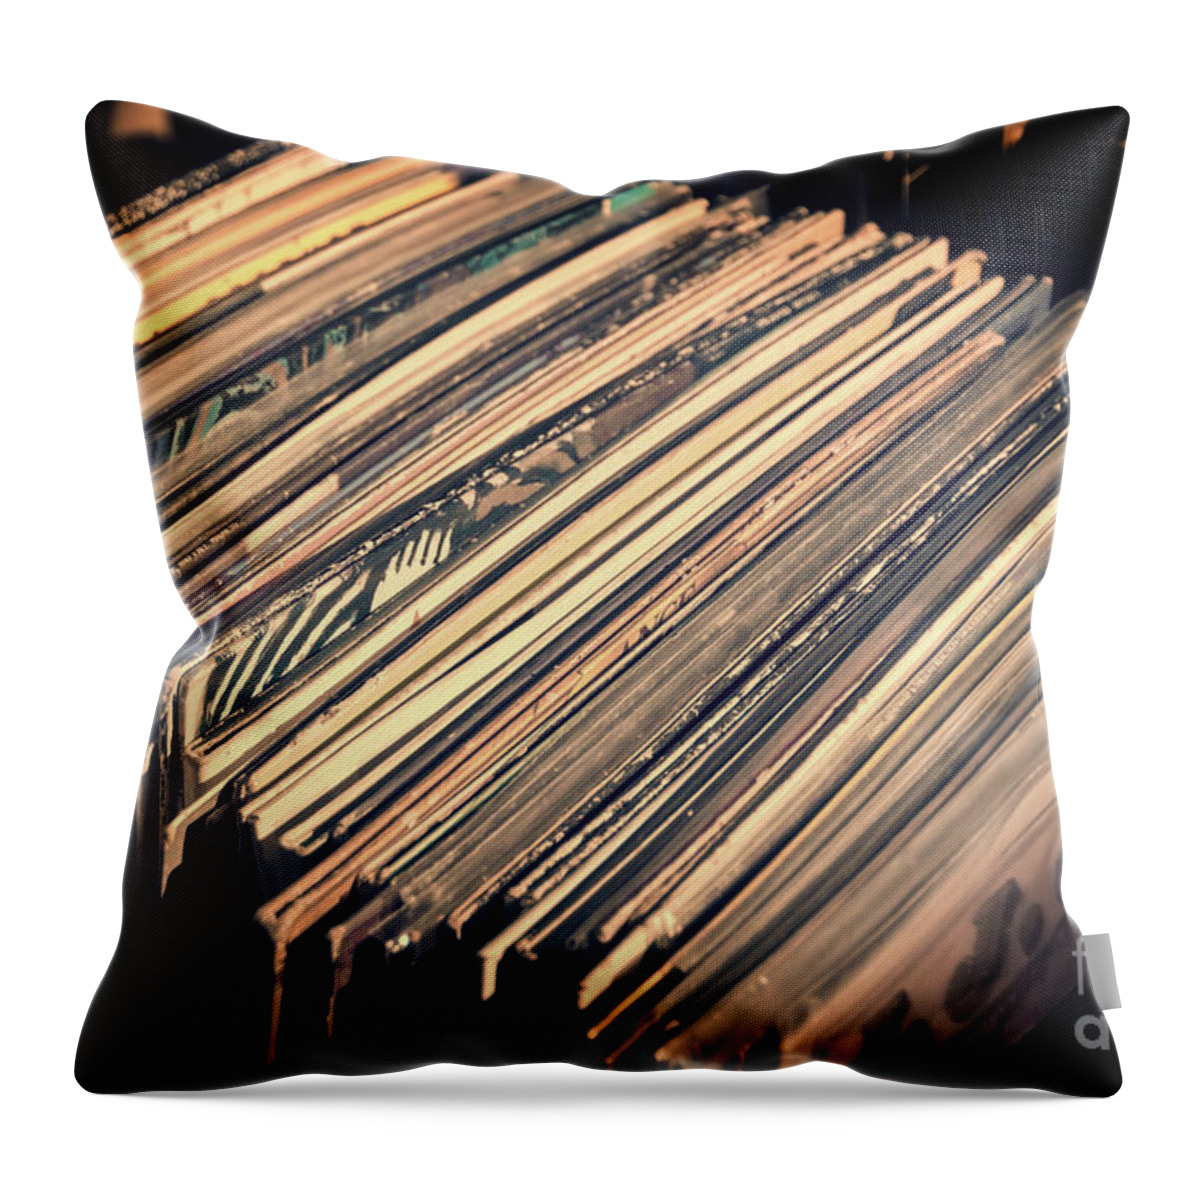 Music Throw Pillow featuring the photograph Vinyl records by Delphimages Photo Creations